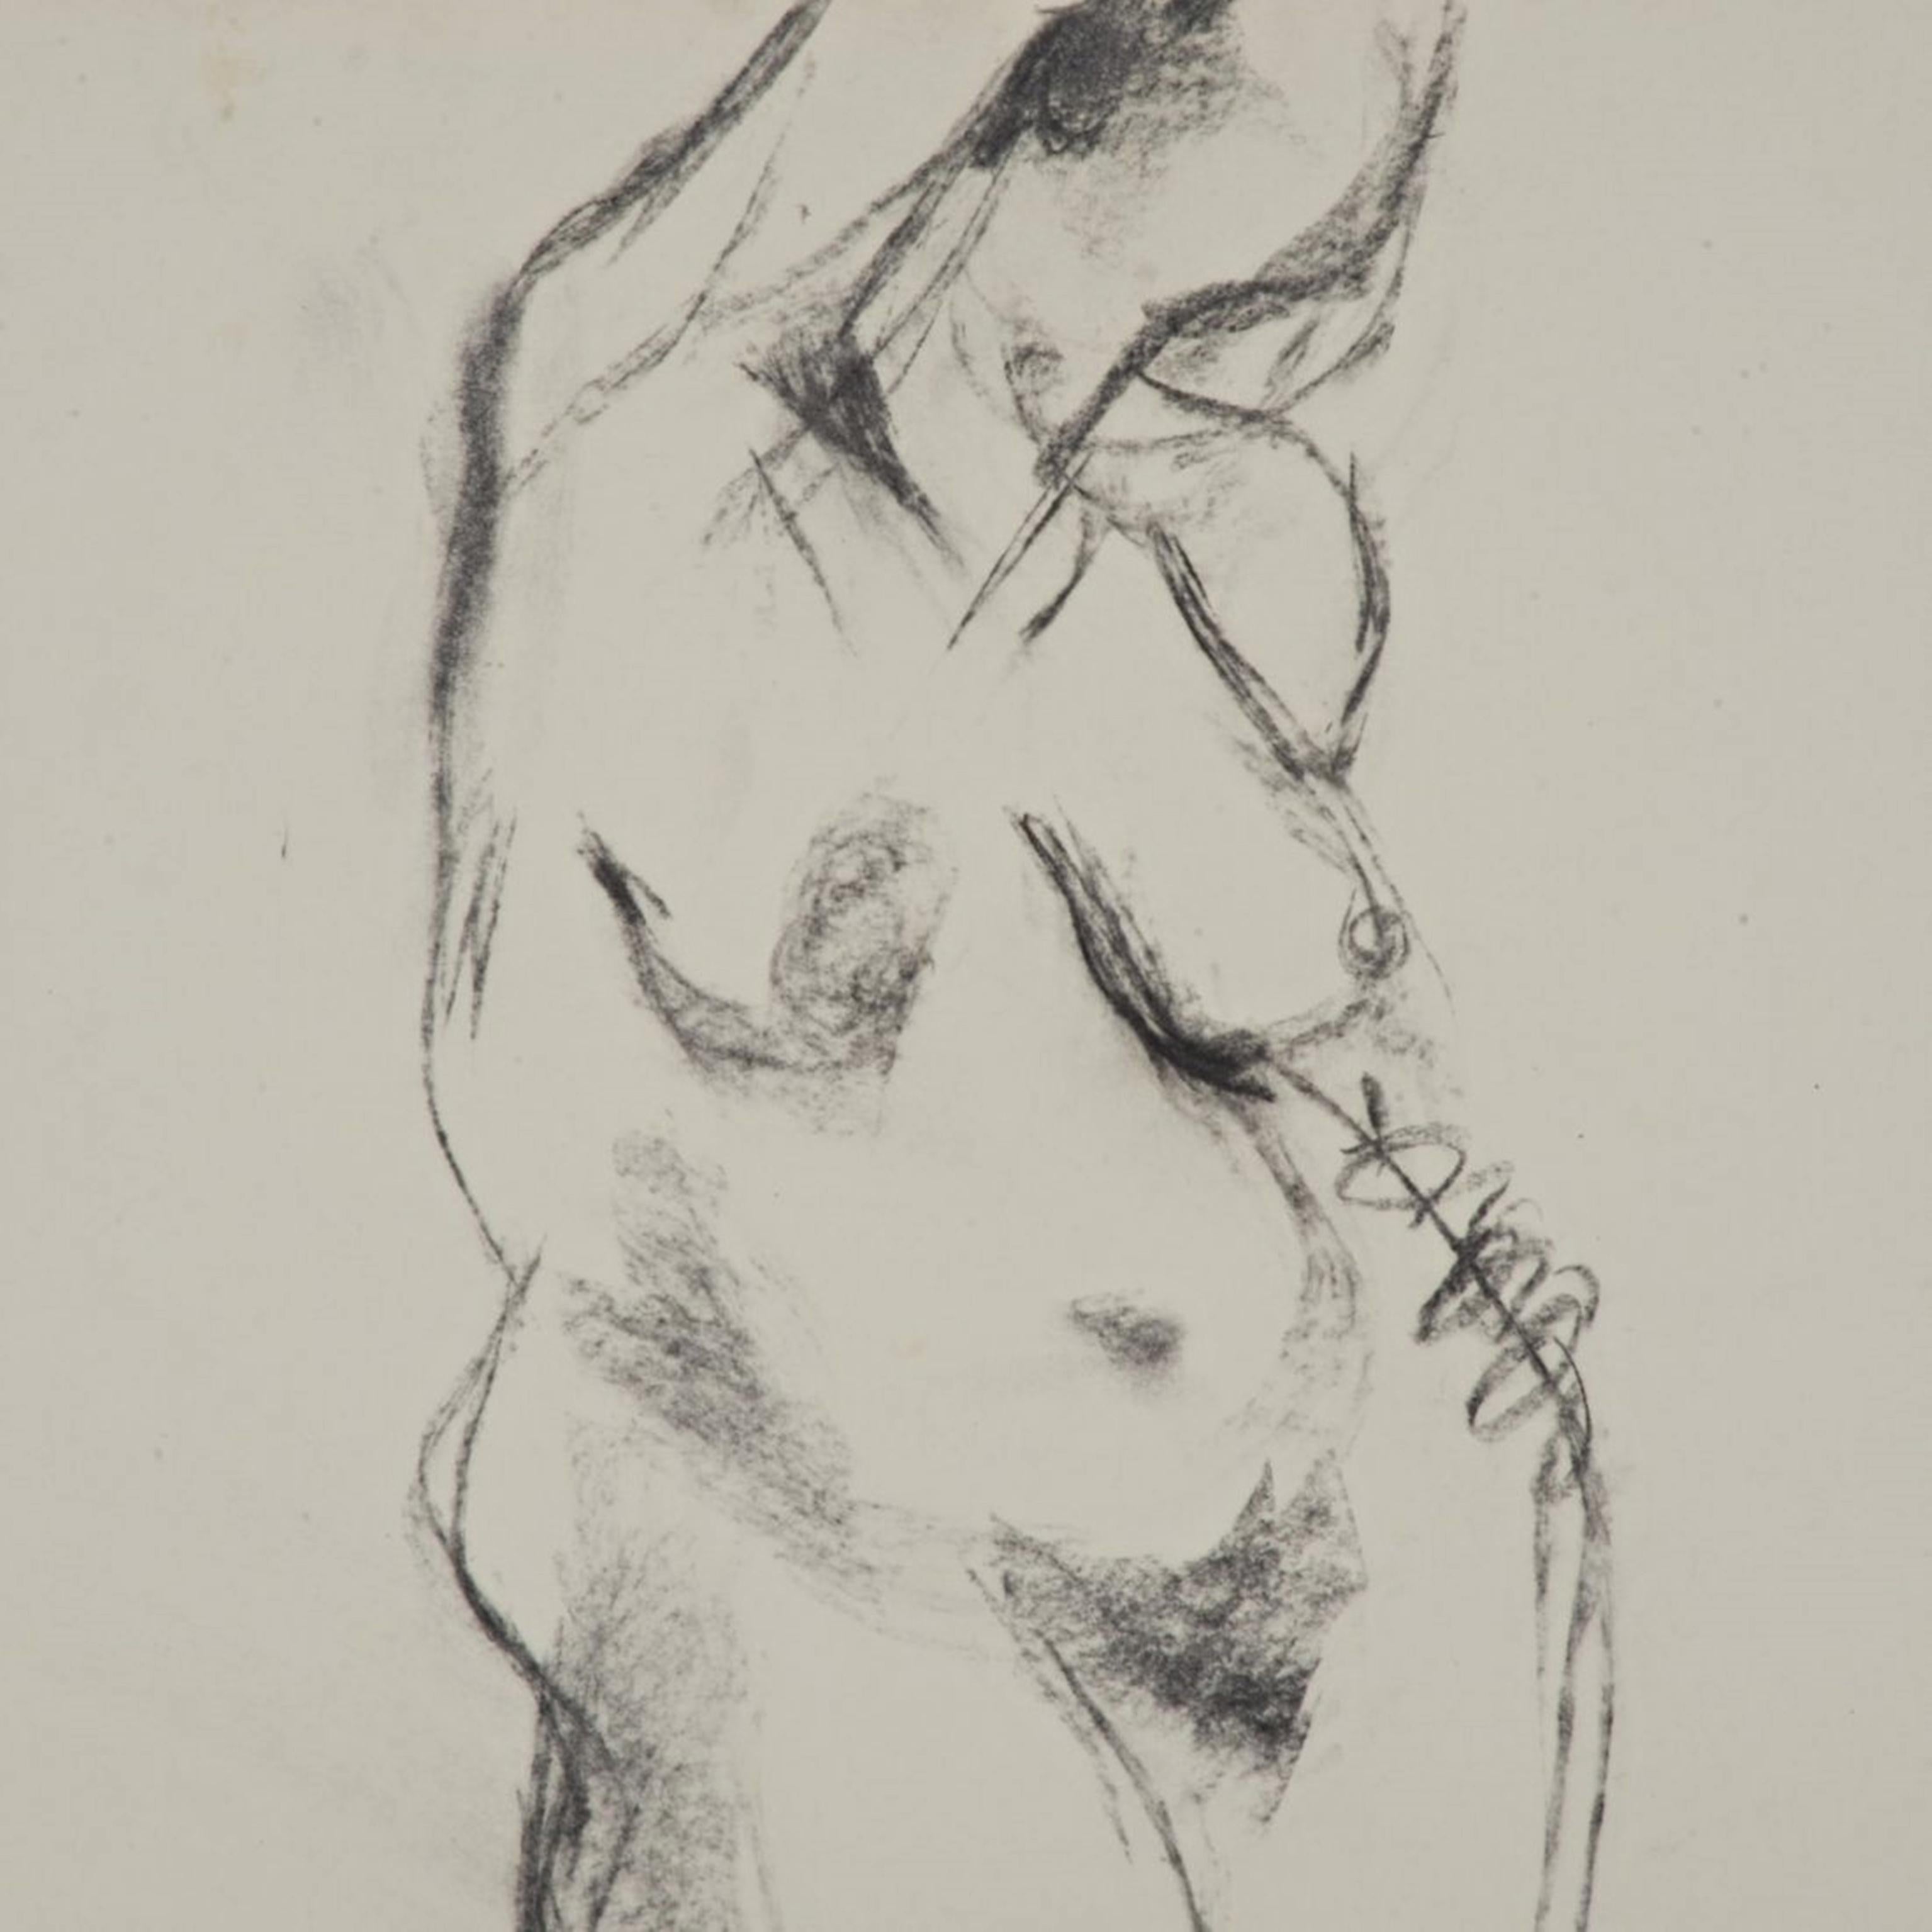 Untitled nude (signed, dedicated & inscribed to Clement Greenberg) - Art by Anthony Caro